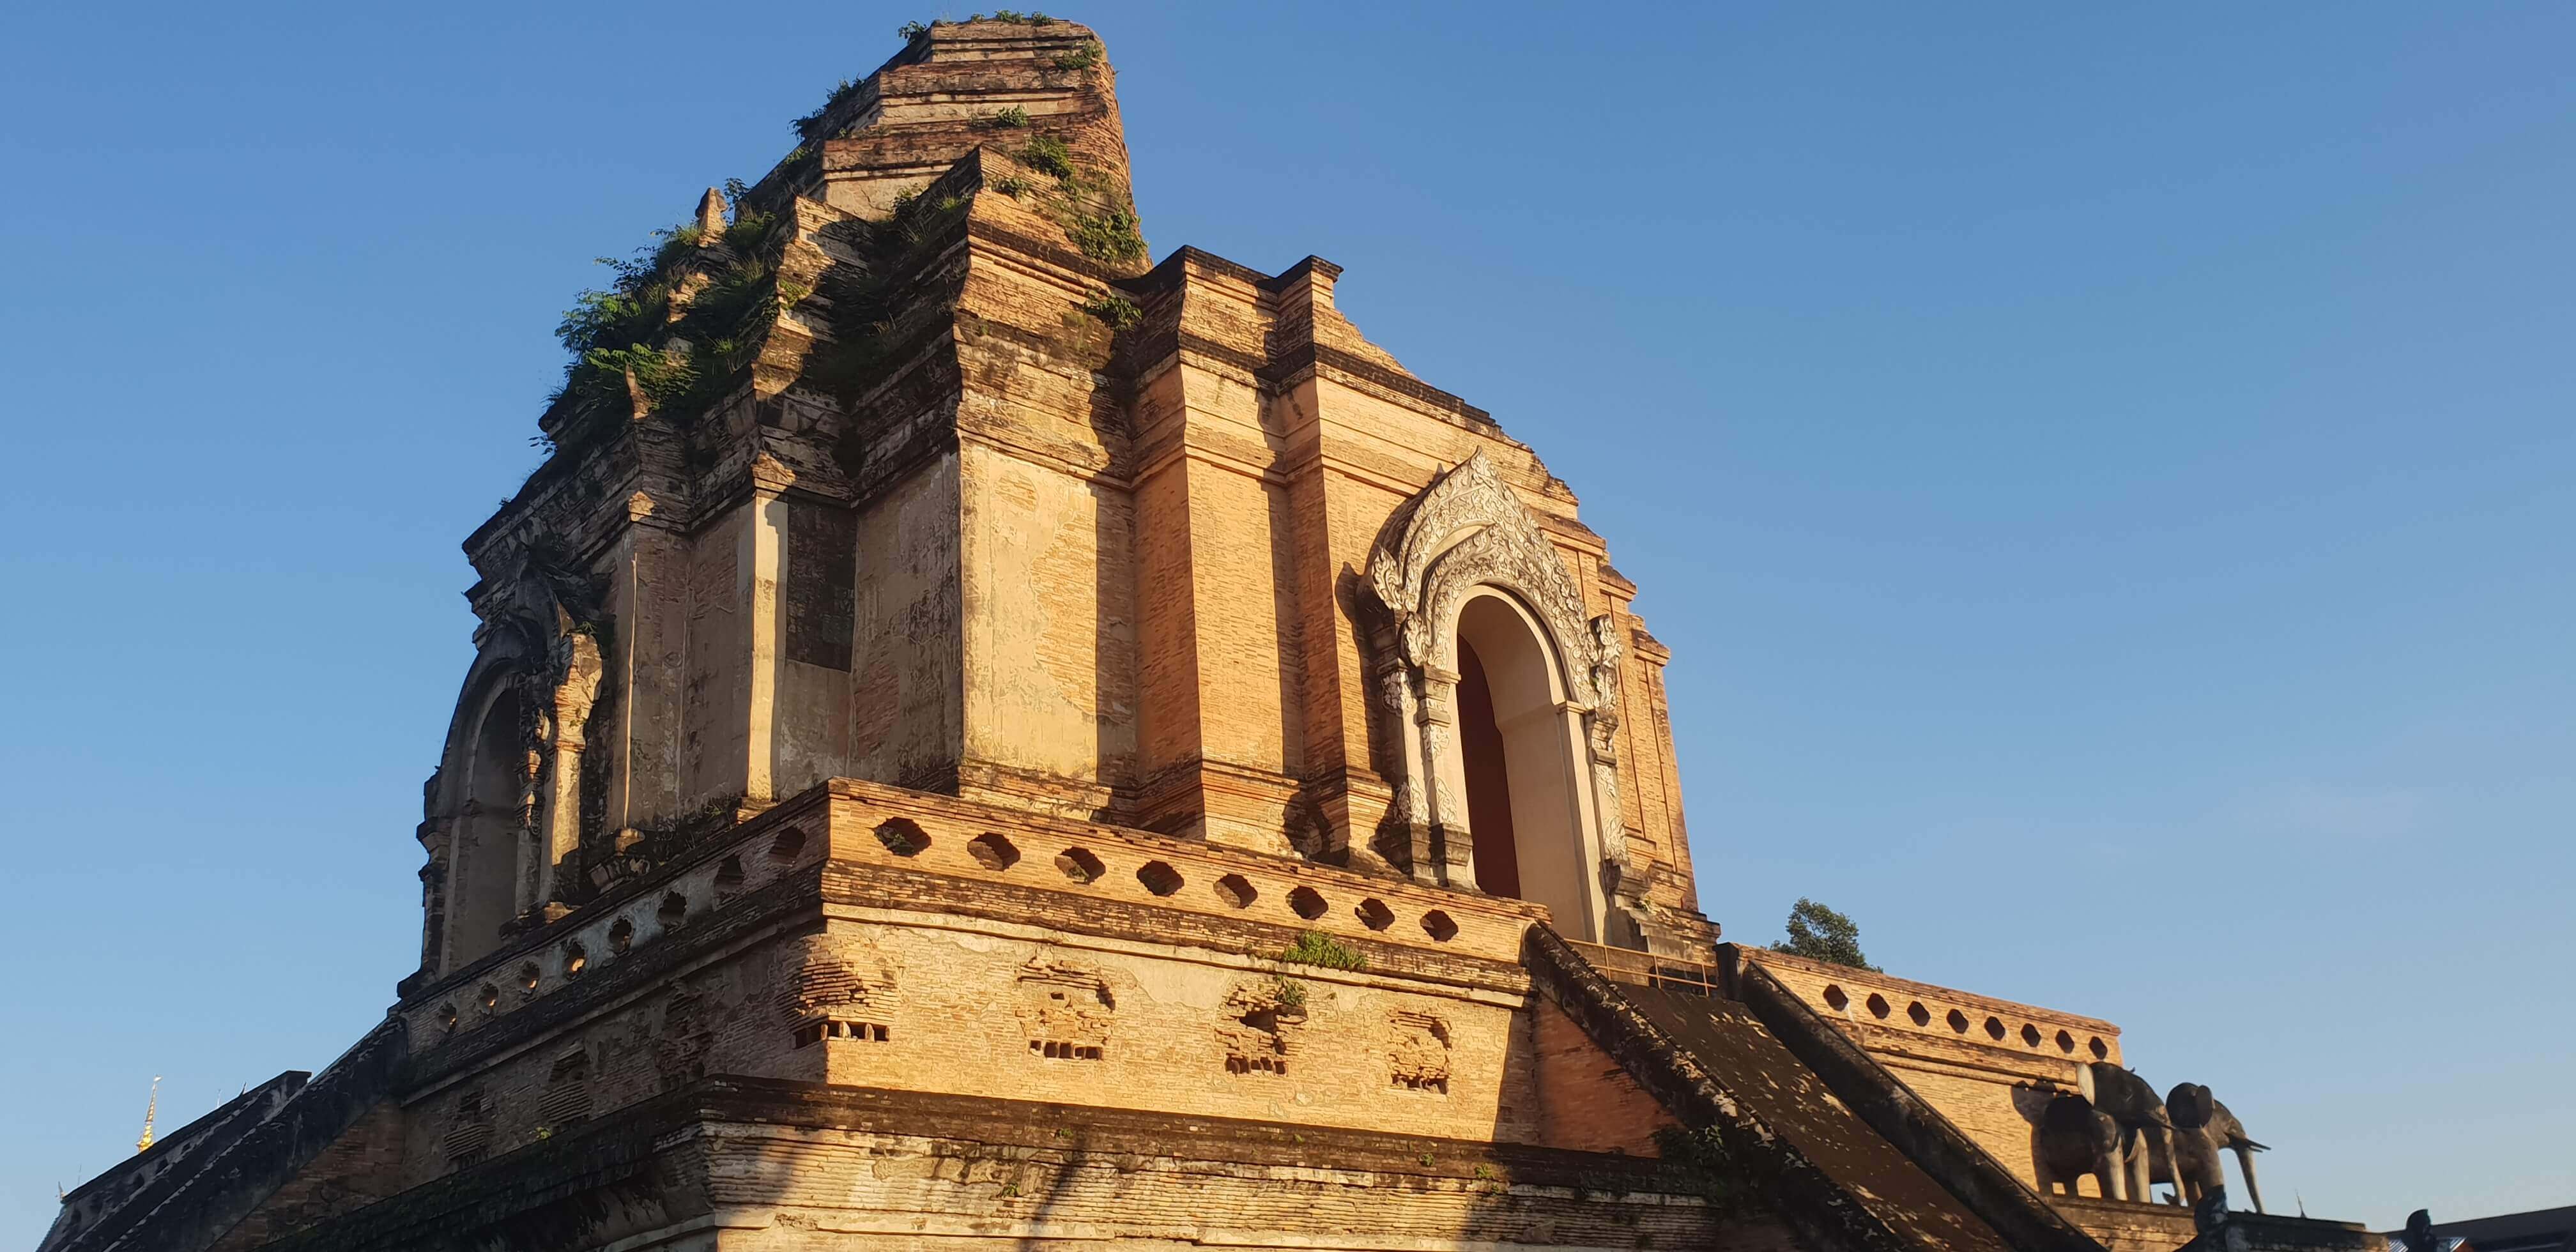 Ruins of the Pagoda in Wat Chedi Luang